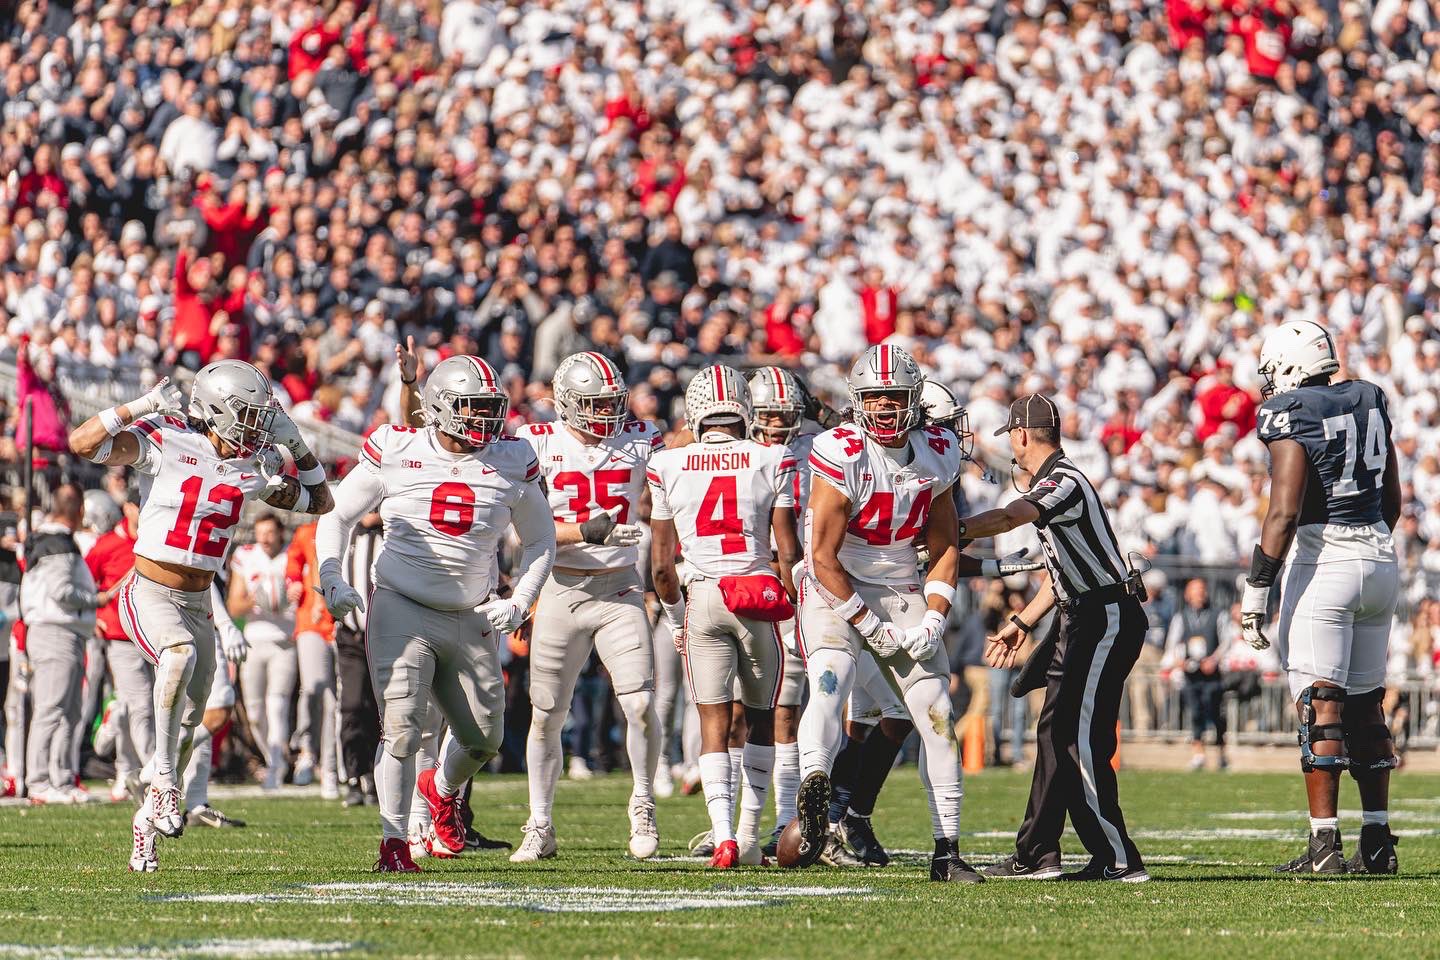 A group of vicious buckeyes